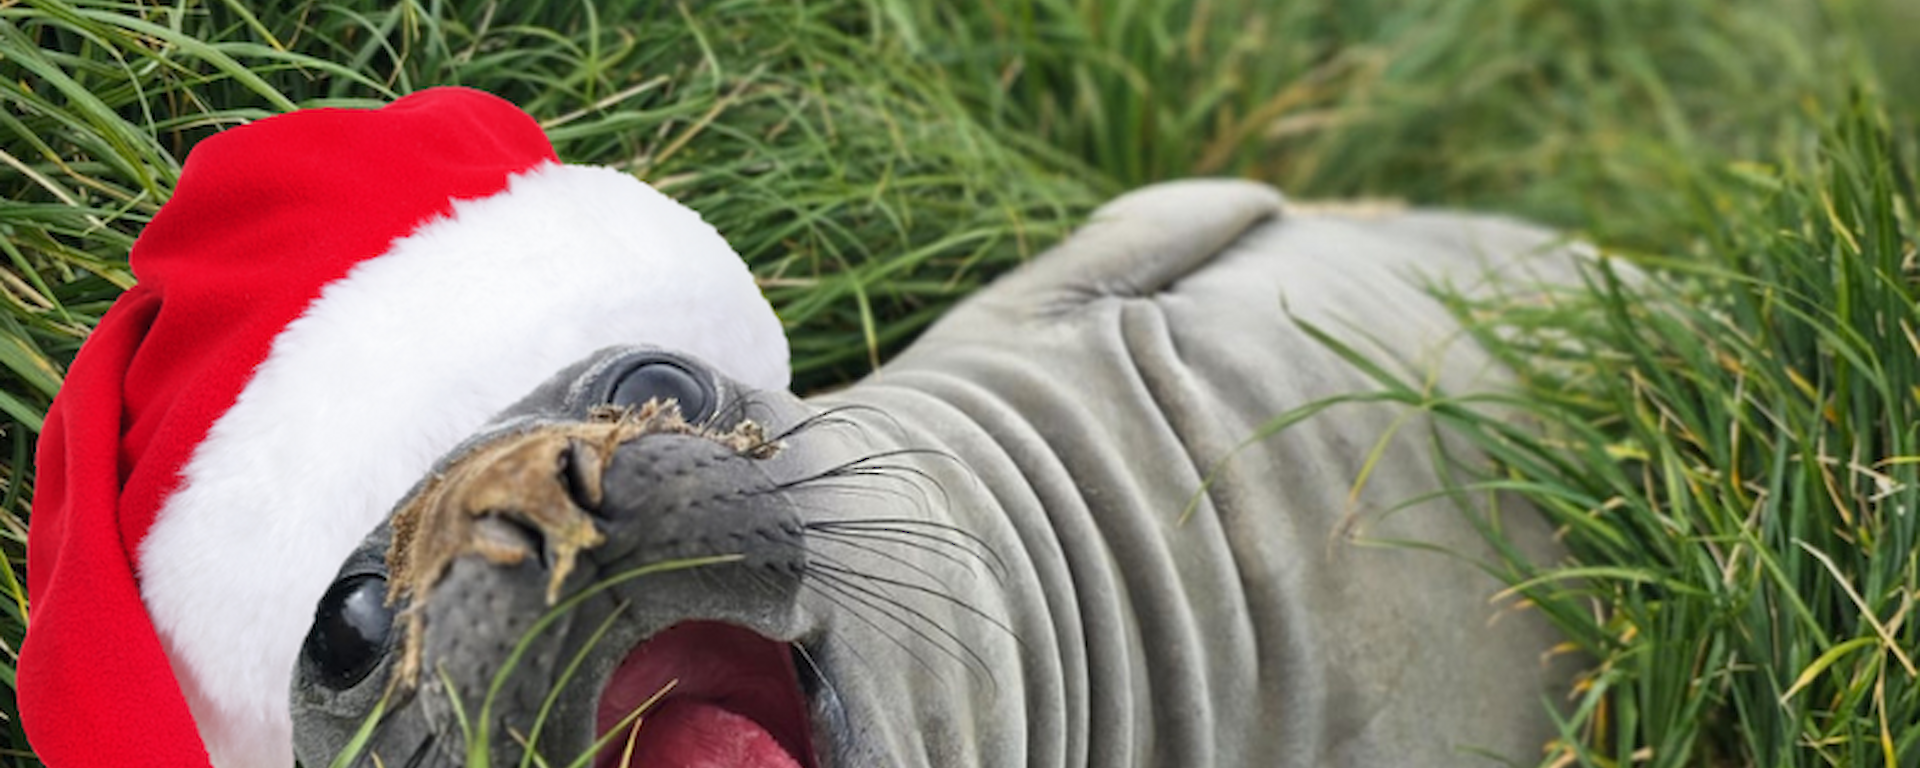 An elephant seal with its mouth open, lying in grass with a Christmas hat photoshopped on.